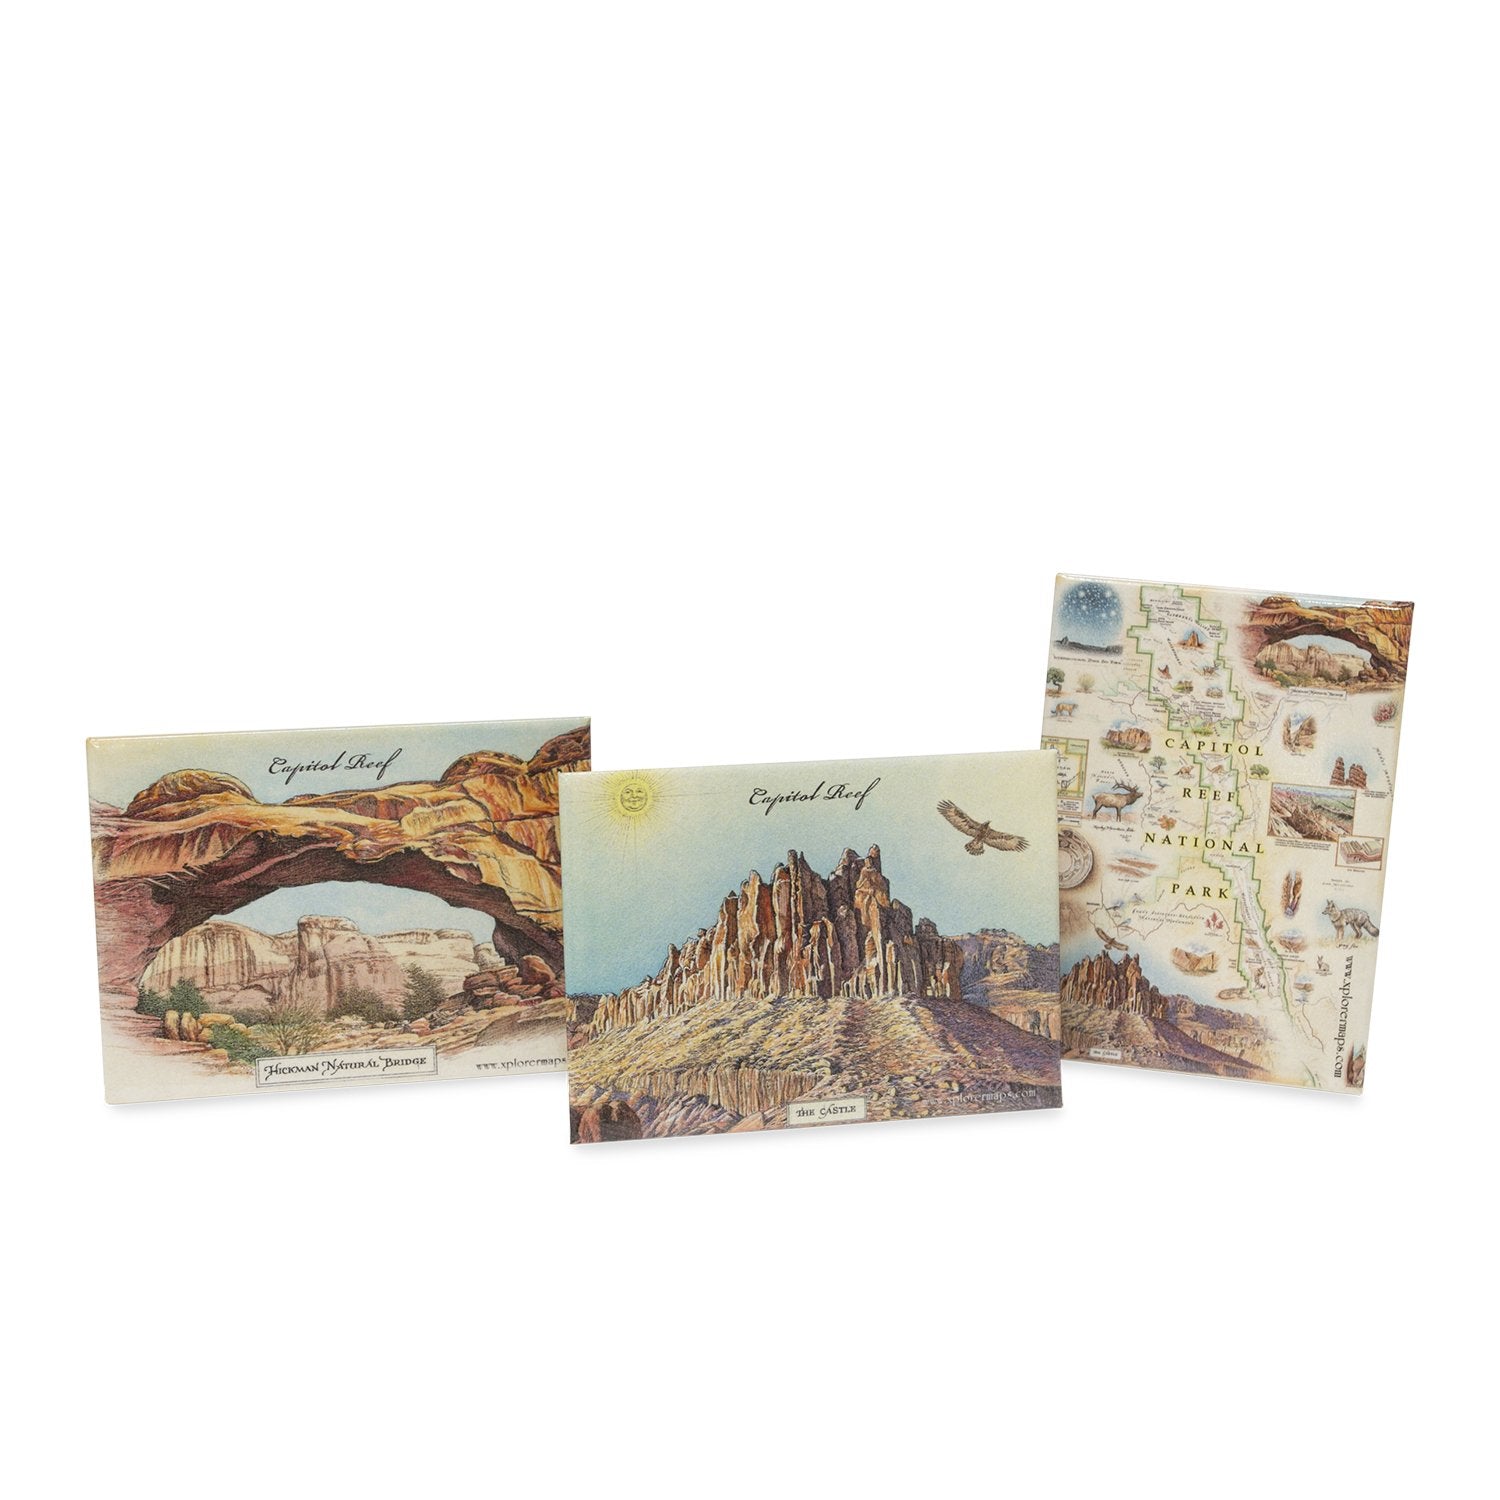 Utah's Capitol Reef National Park Map magnets in earth tones. Featuring Claret Cup Cactus, Narrowleaf Yucca, Prince's Plume, and the Two-Needle Pinyon Pine. Detailed depictions of landmarks and geographic wonders like the Lower Muley Twist Canyon, Capitol Gorge, and Hickman Natural Bridge.  